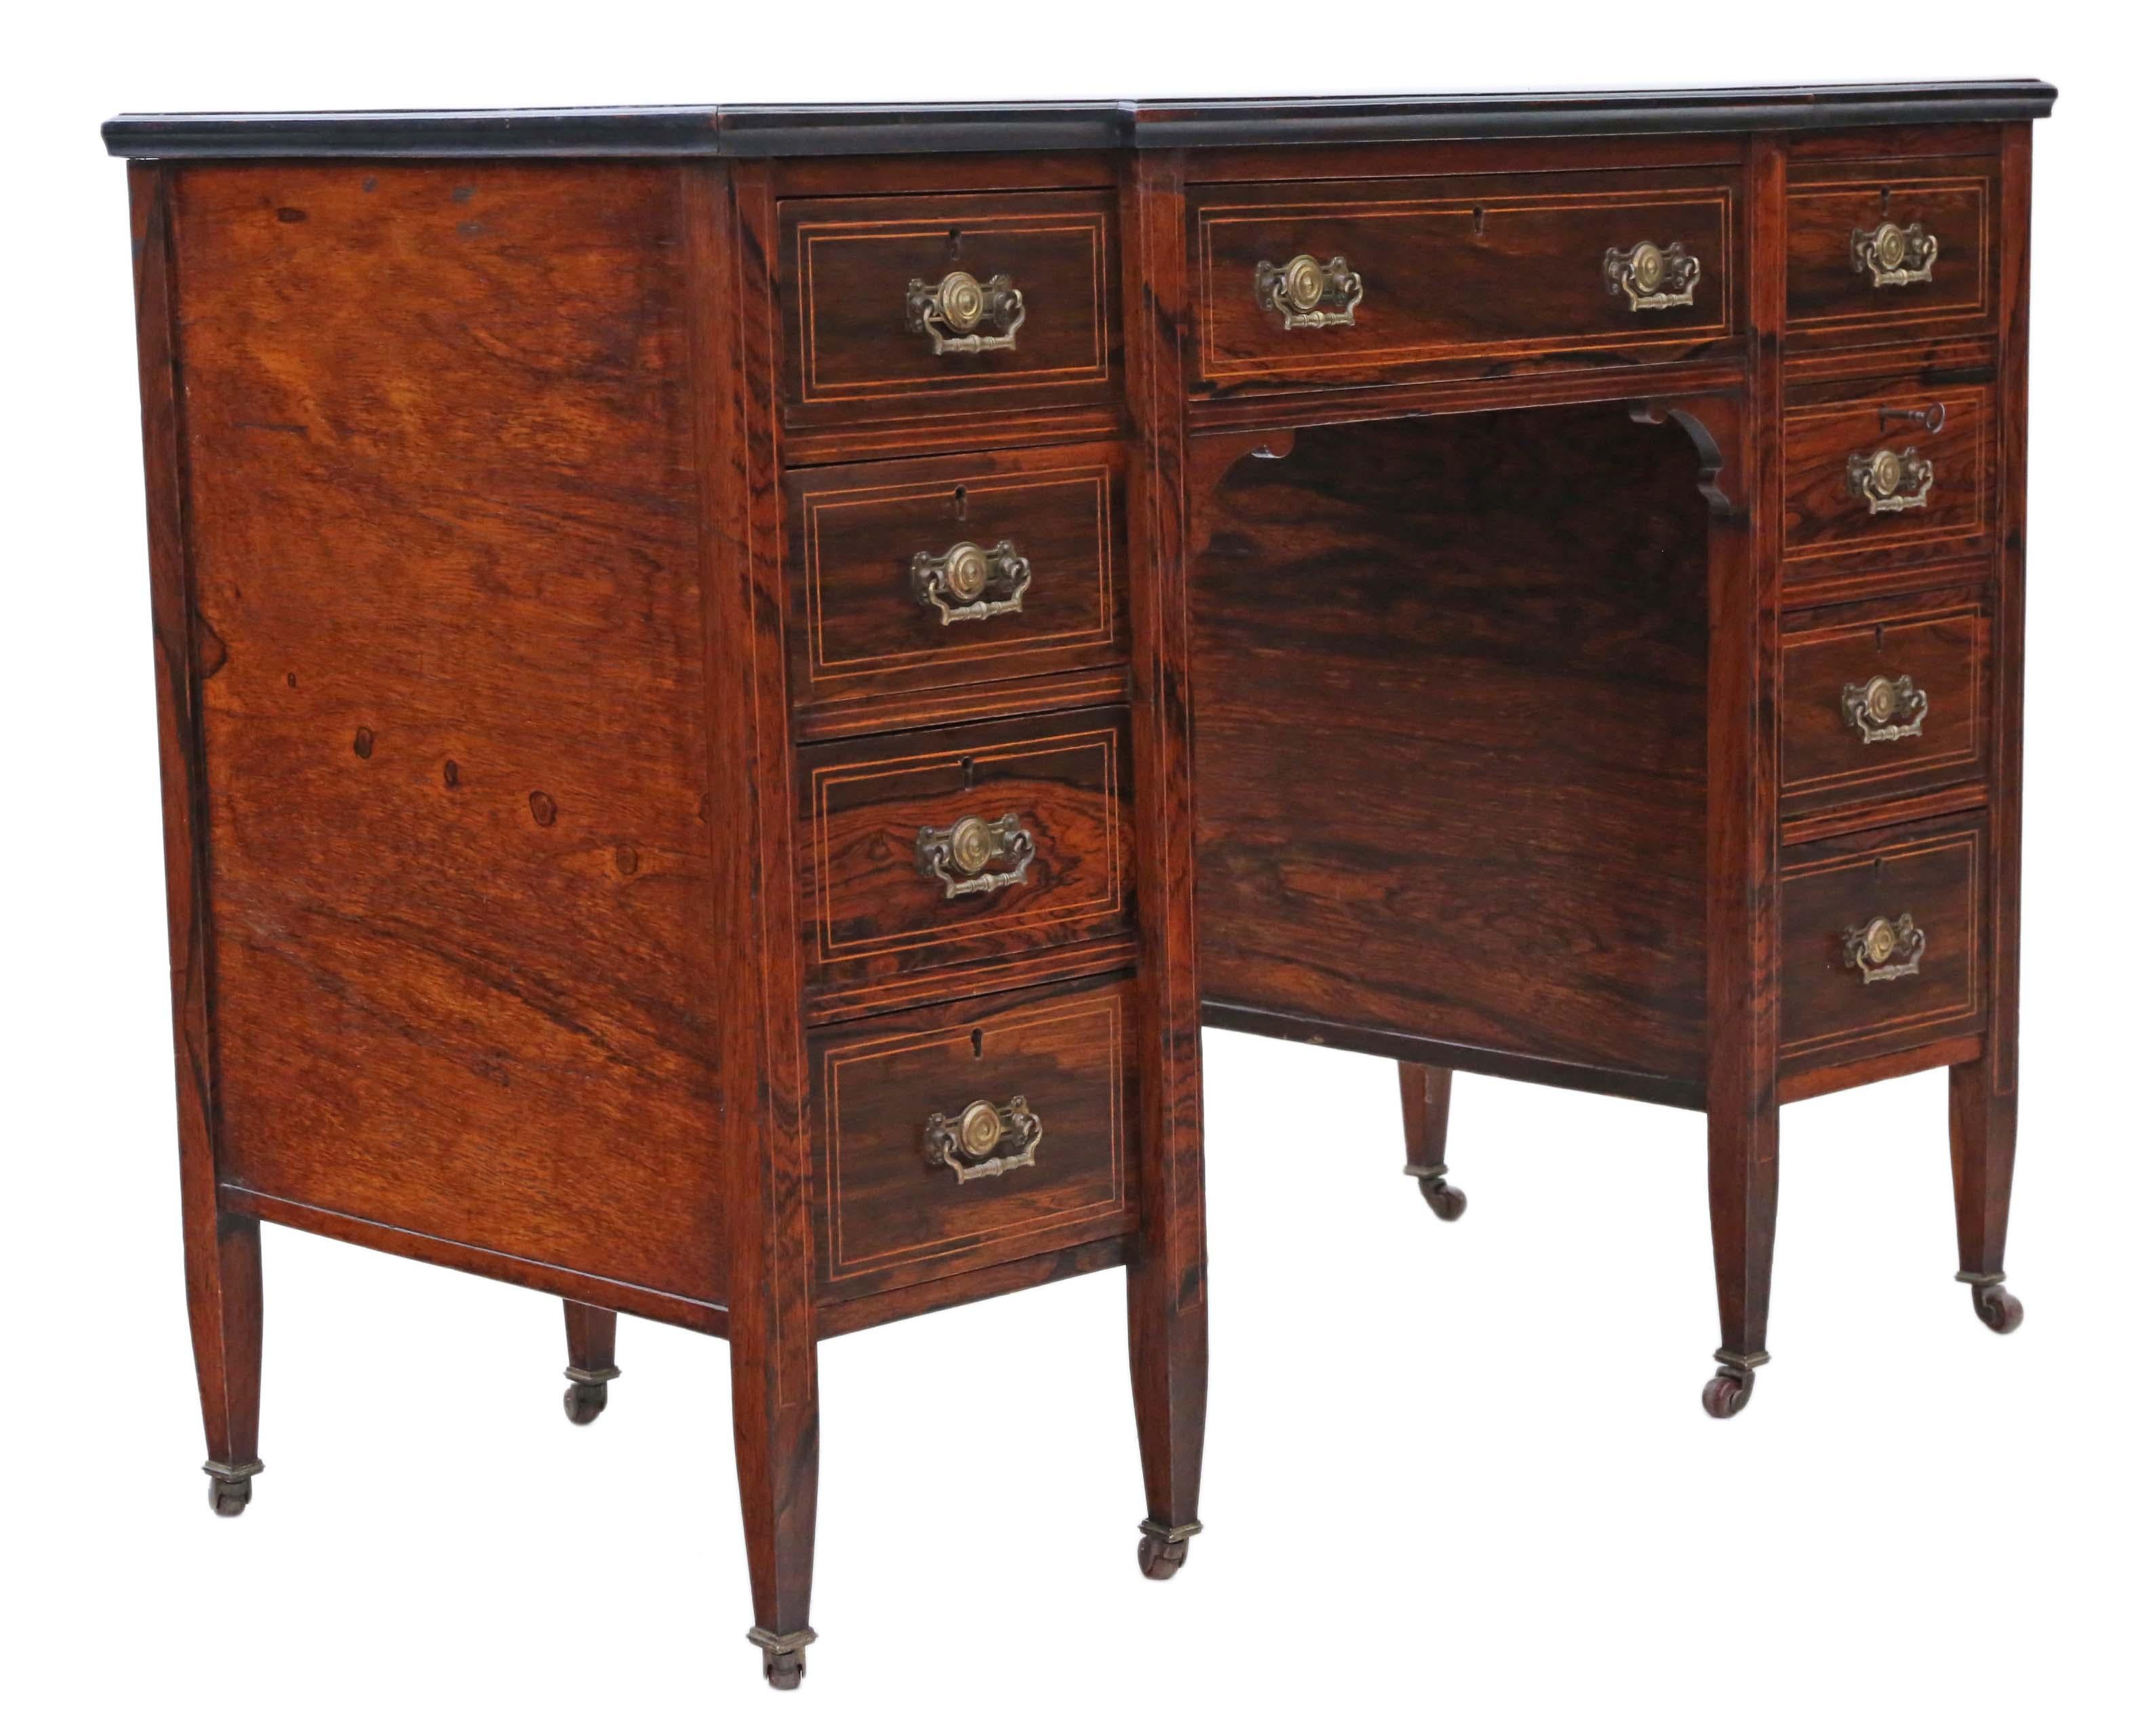 Late 19th Century Small Victorian Inlaid Rosewood Twin Pedestal Desk Writing Table